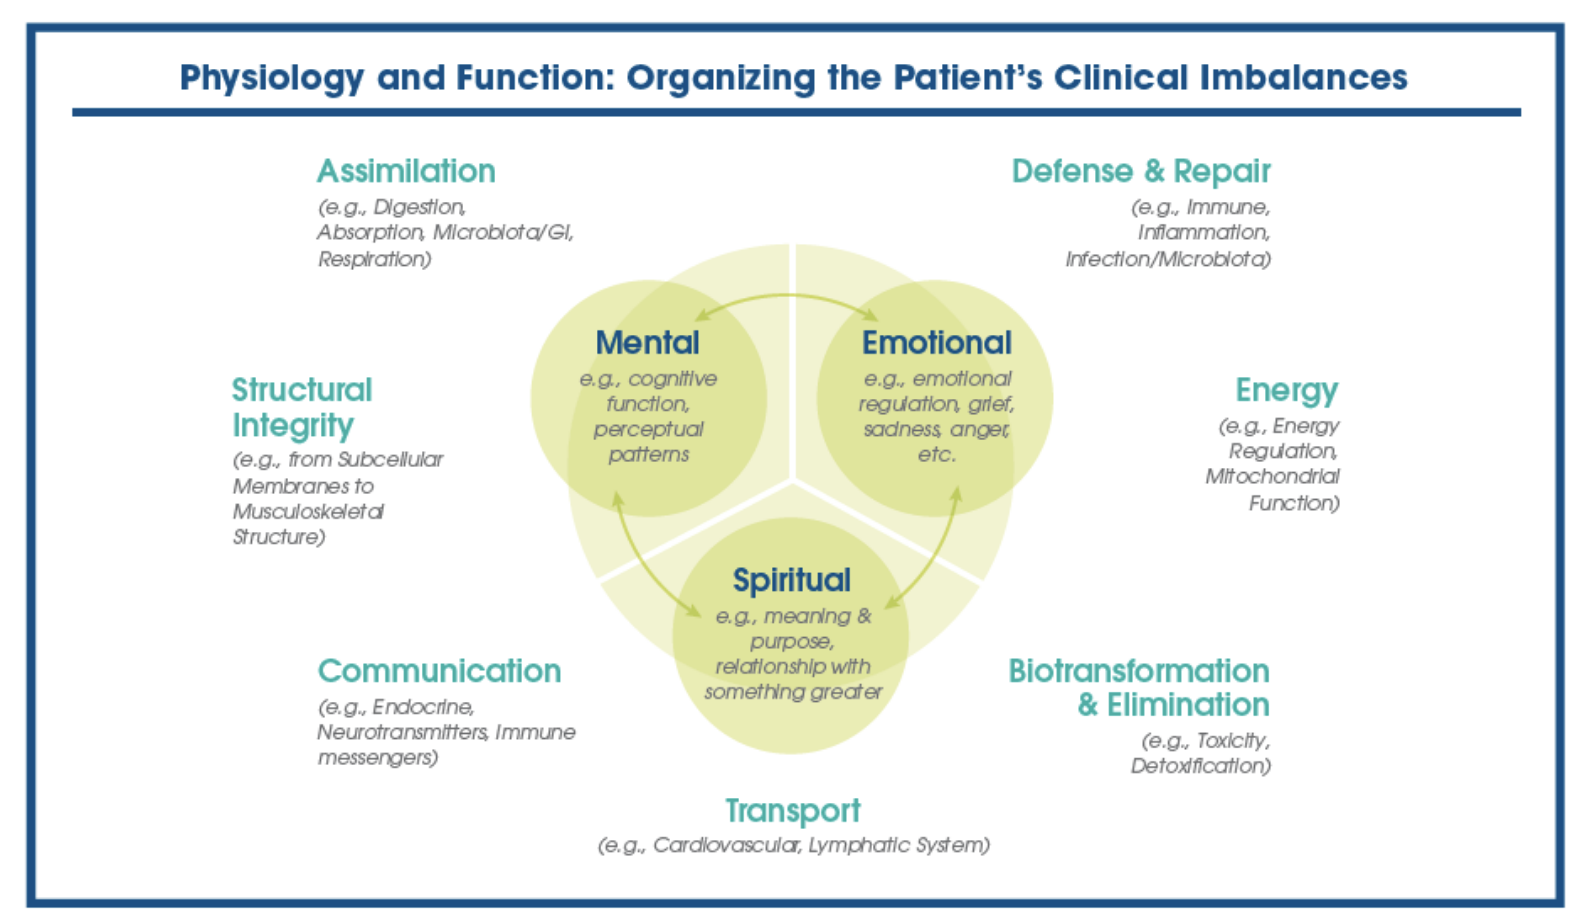 Physiology & Function: Organizing the Patient's Clinical Imbalances